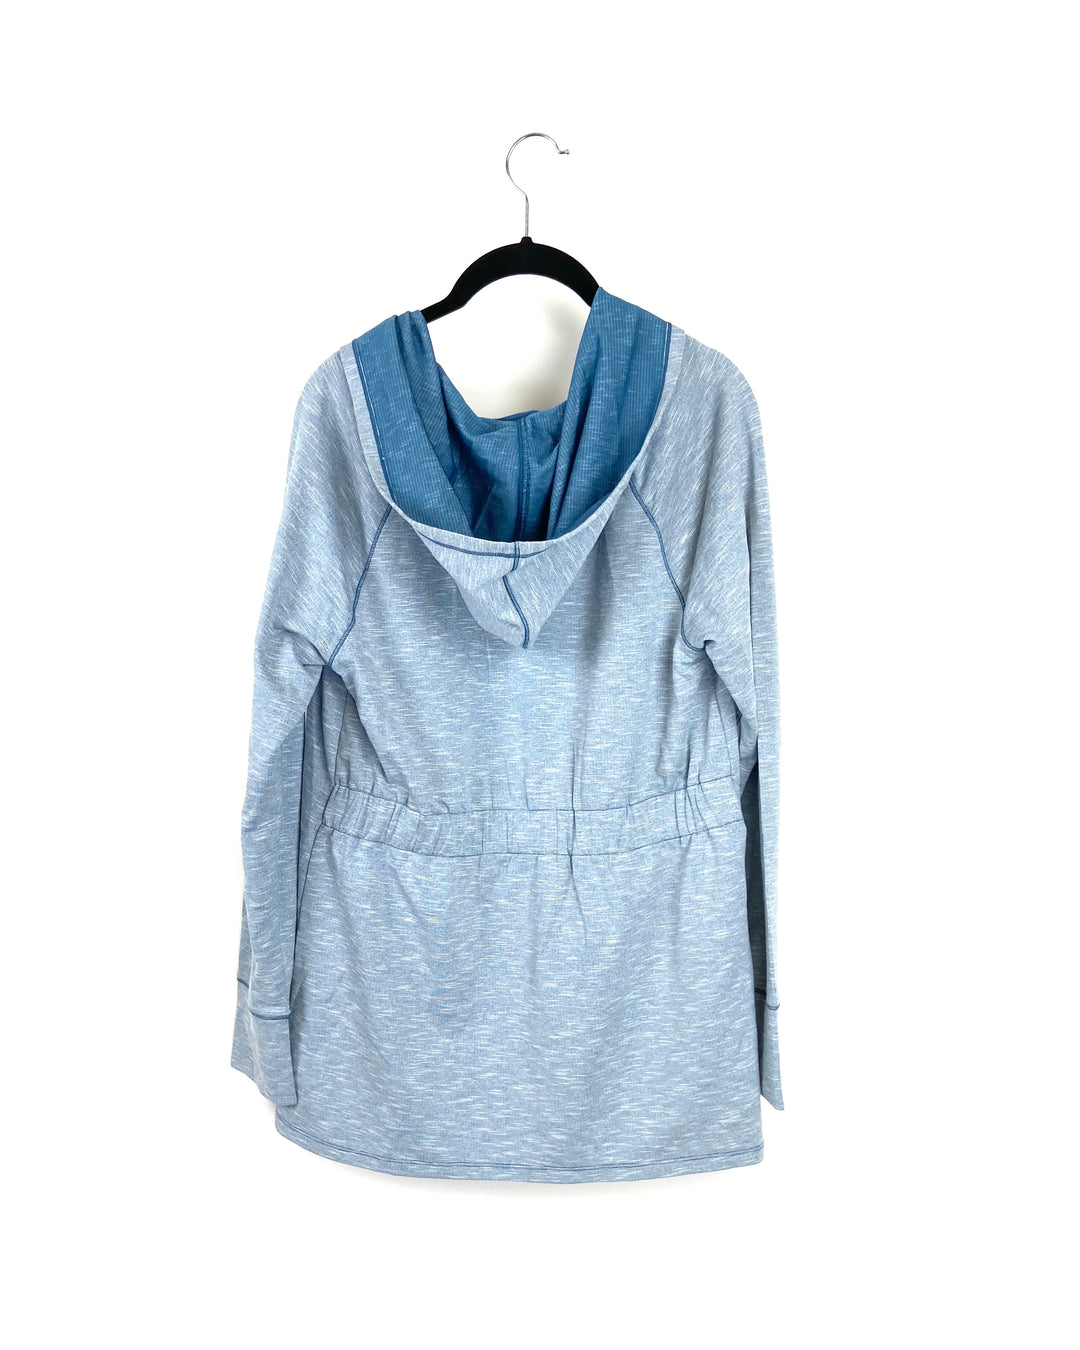 Blue Hooded Outdoor Cardigan - Small